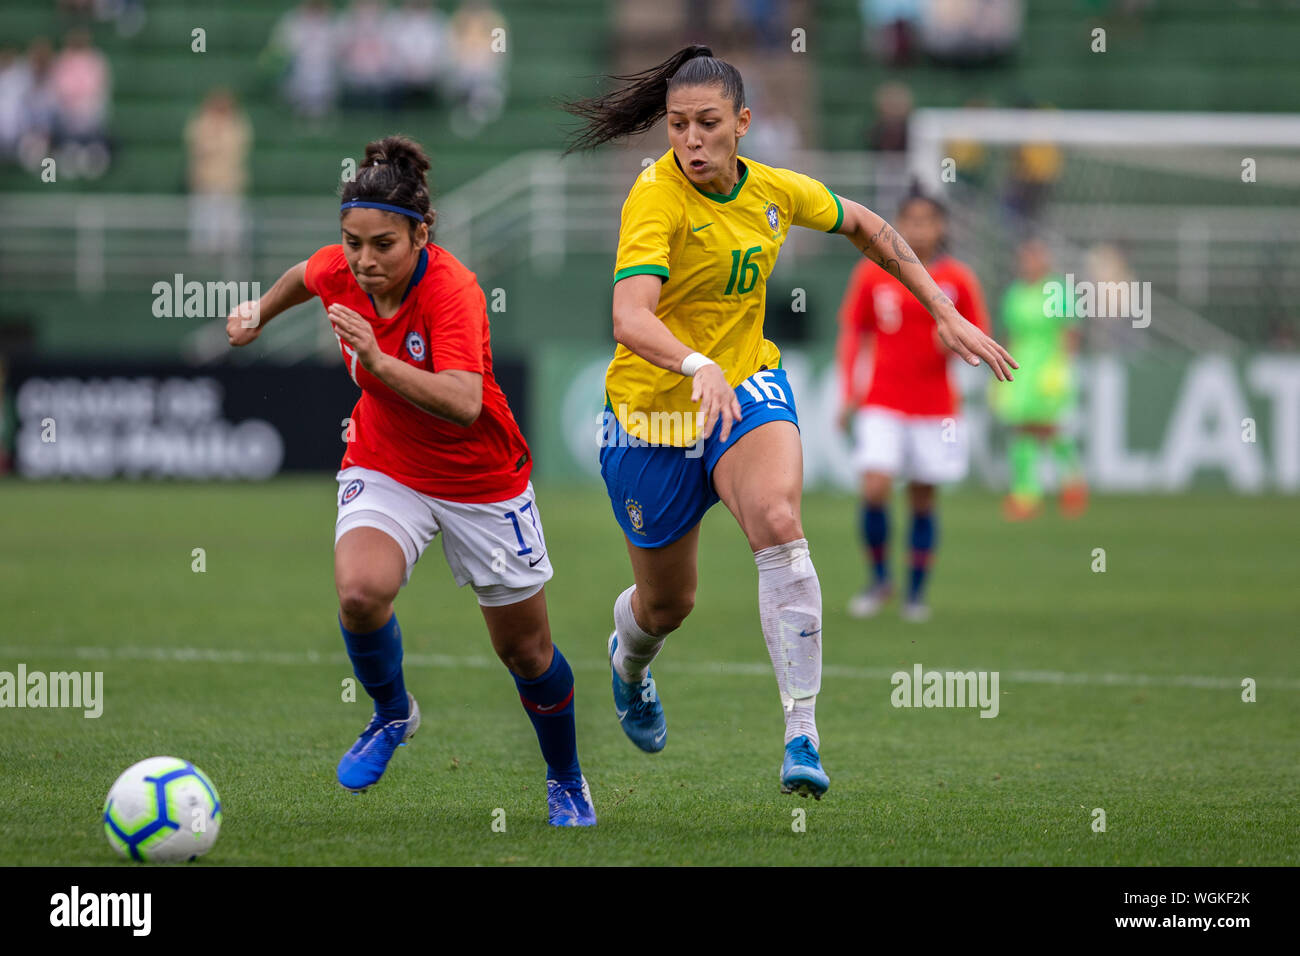 SÃO PAULO, SP - 01.09.2019: BRAZIL X CHILE - Uber Women'ccer Cup Cup - Chilean national team wins the Brazilian women&#3soccer tea team on penaltieser a 0-0 dra draw in normal time. With a lot of rain, which disruptee football oll of both teams, and with audience of 15,047 paying and income of $ 174,073.00. The match took place this Sunday, September 01, 2019, at the PaBeatriz Stadium. Dispute played during the match Uber Women's So Cup Cup - Chilean Team wins the Brazilian women's soccer team on penalties, after a 0-0w in normal mal time. With a lot of rain, which disrupted the fo Stock Photo